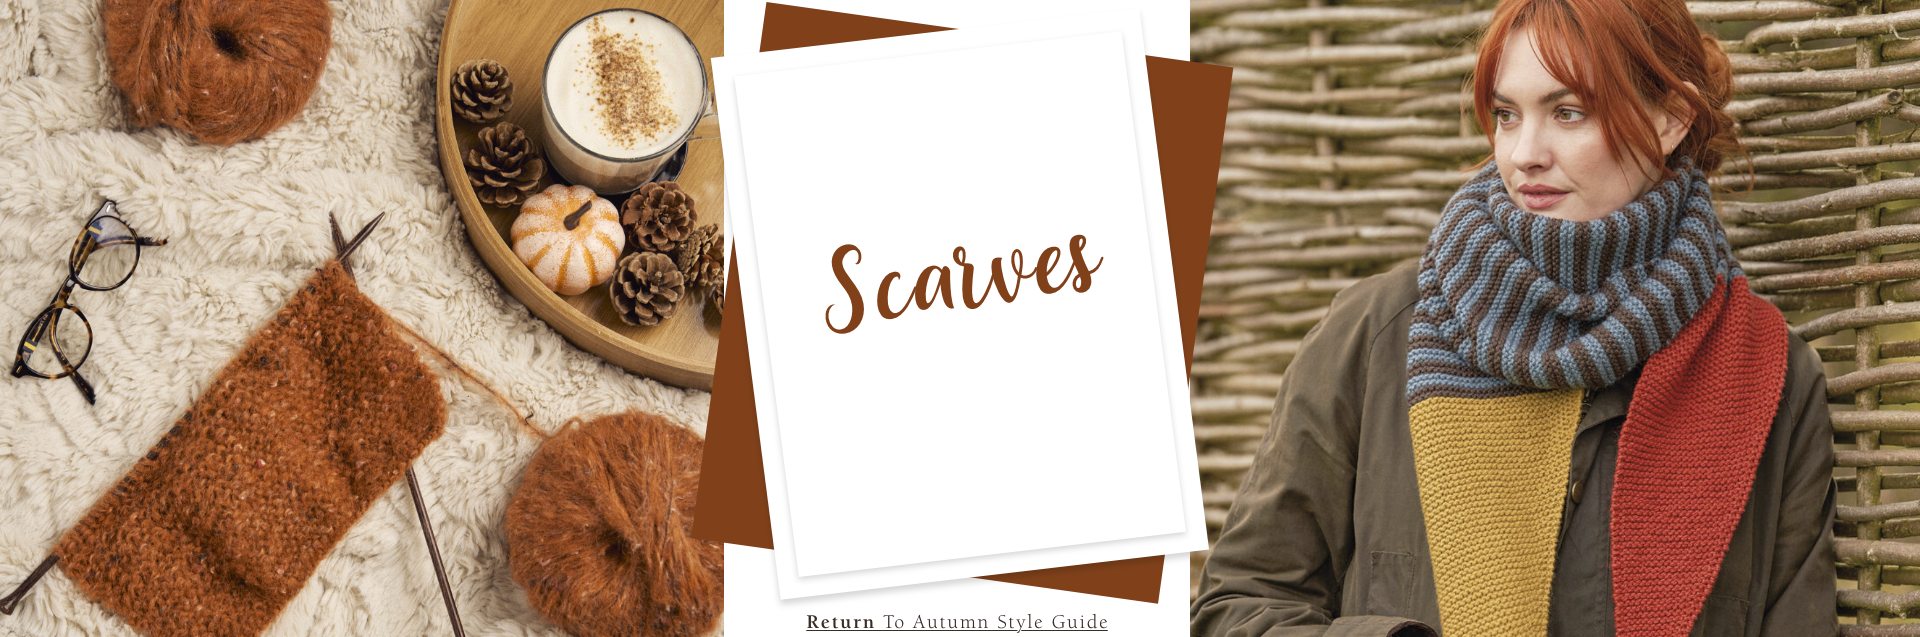 Autumn Style Guide Scarves